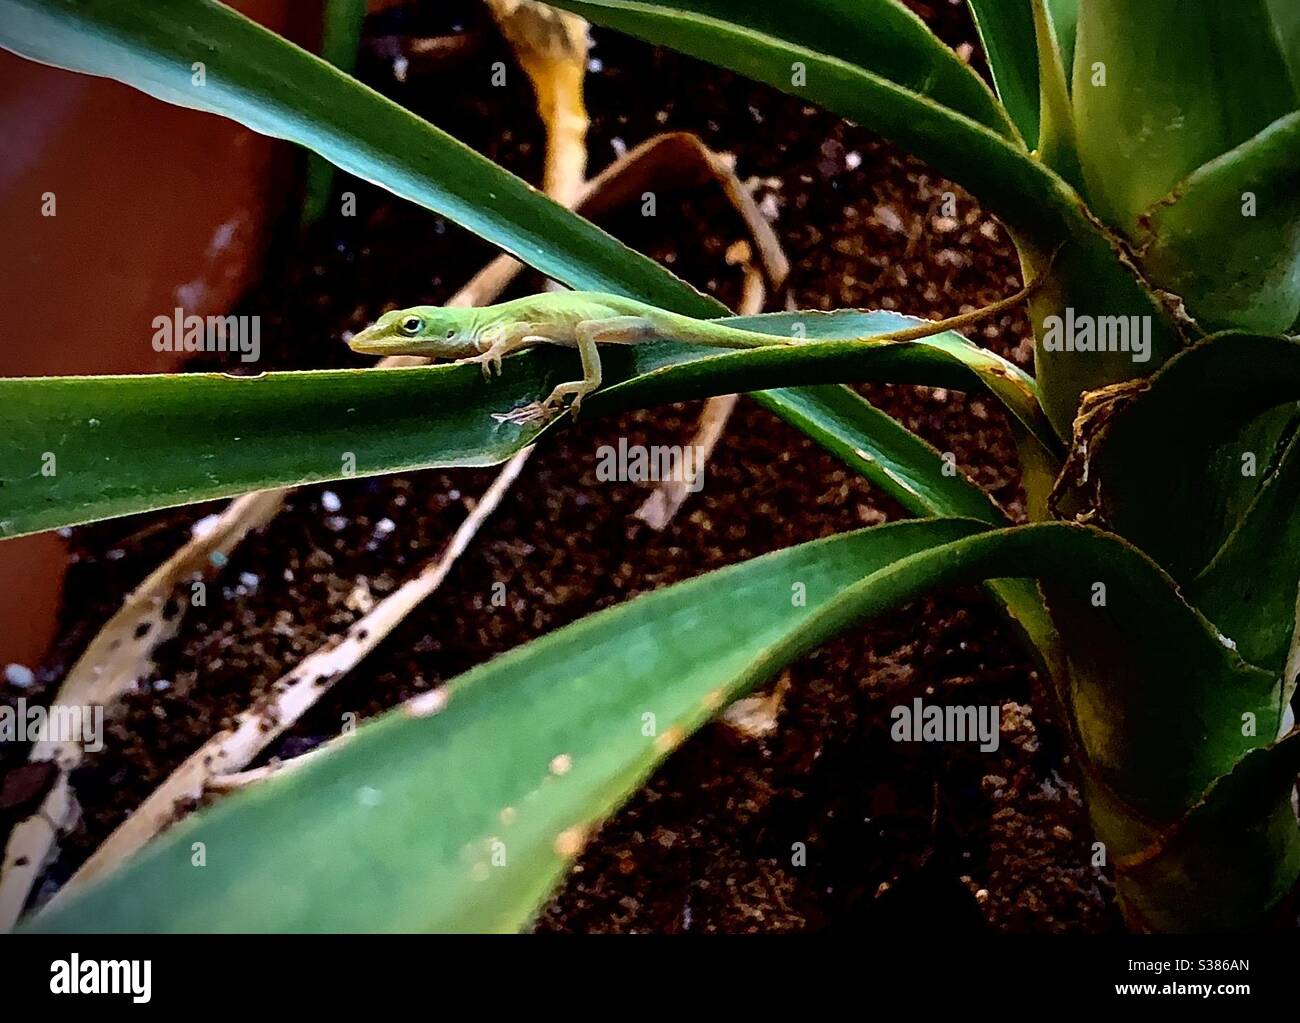 A small green anole lizard scales the blade-like leaf of a potted yucca plant Stock Photo